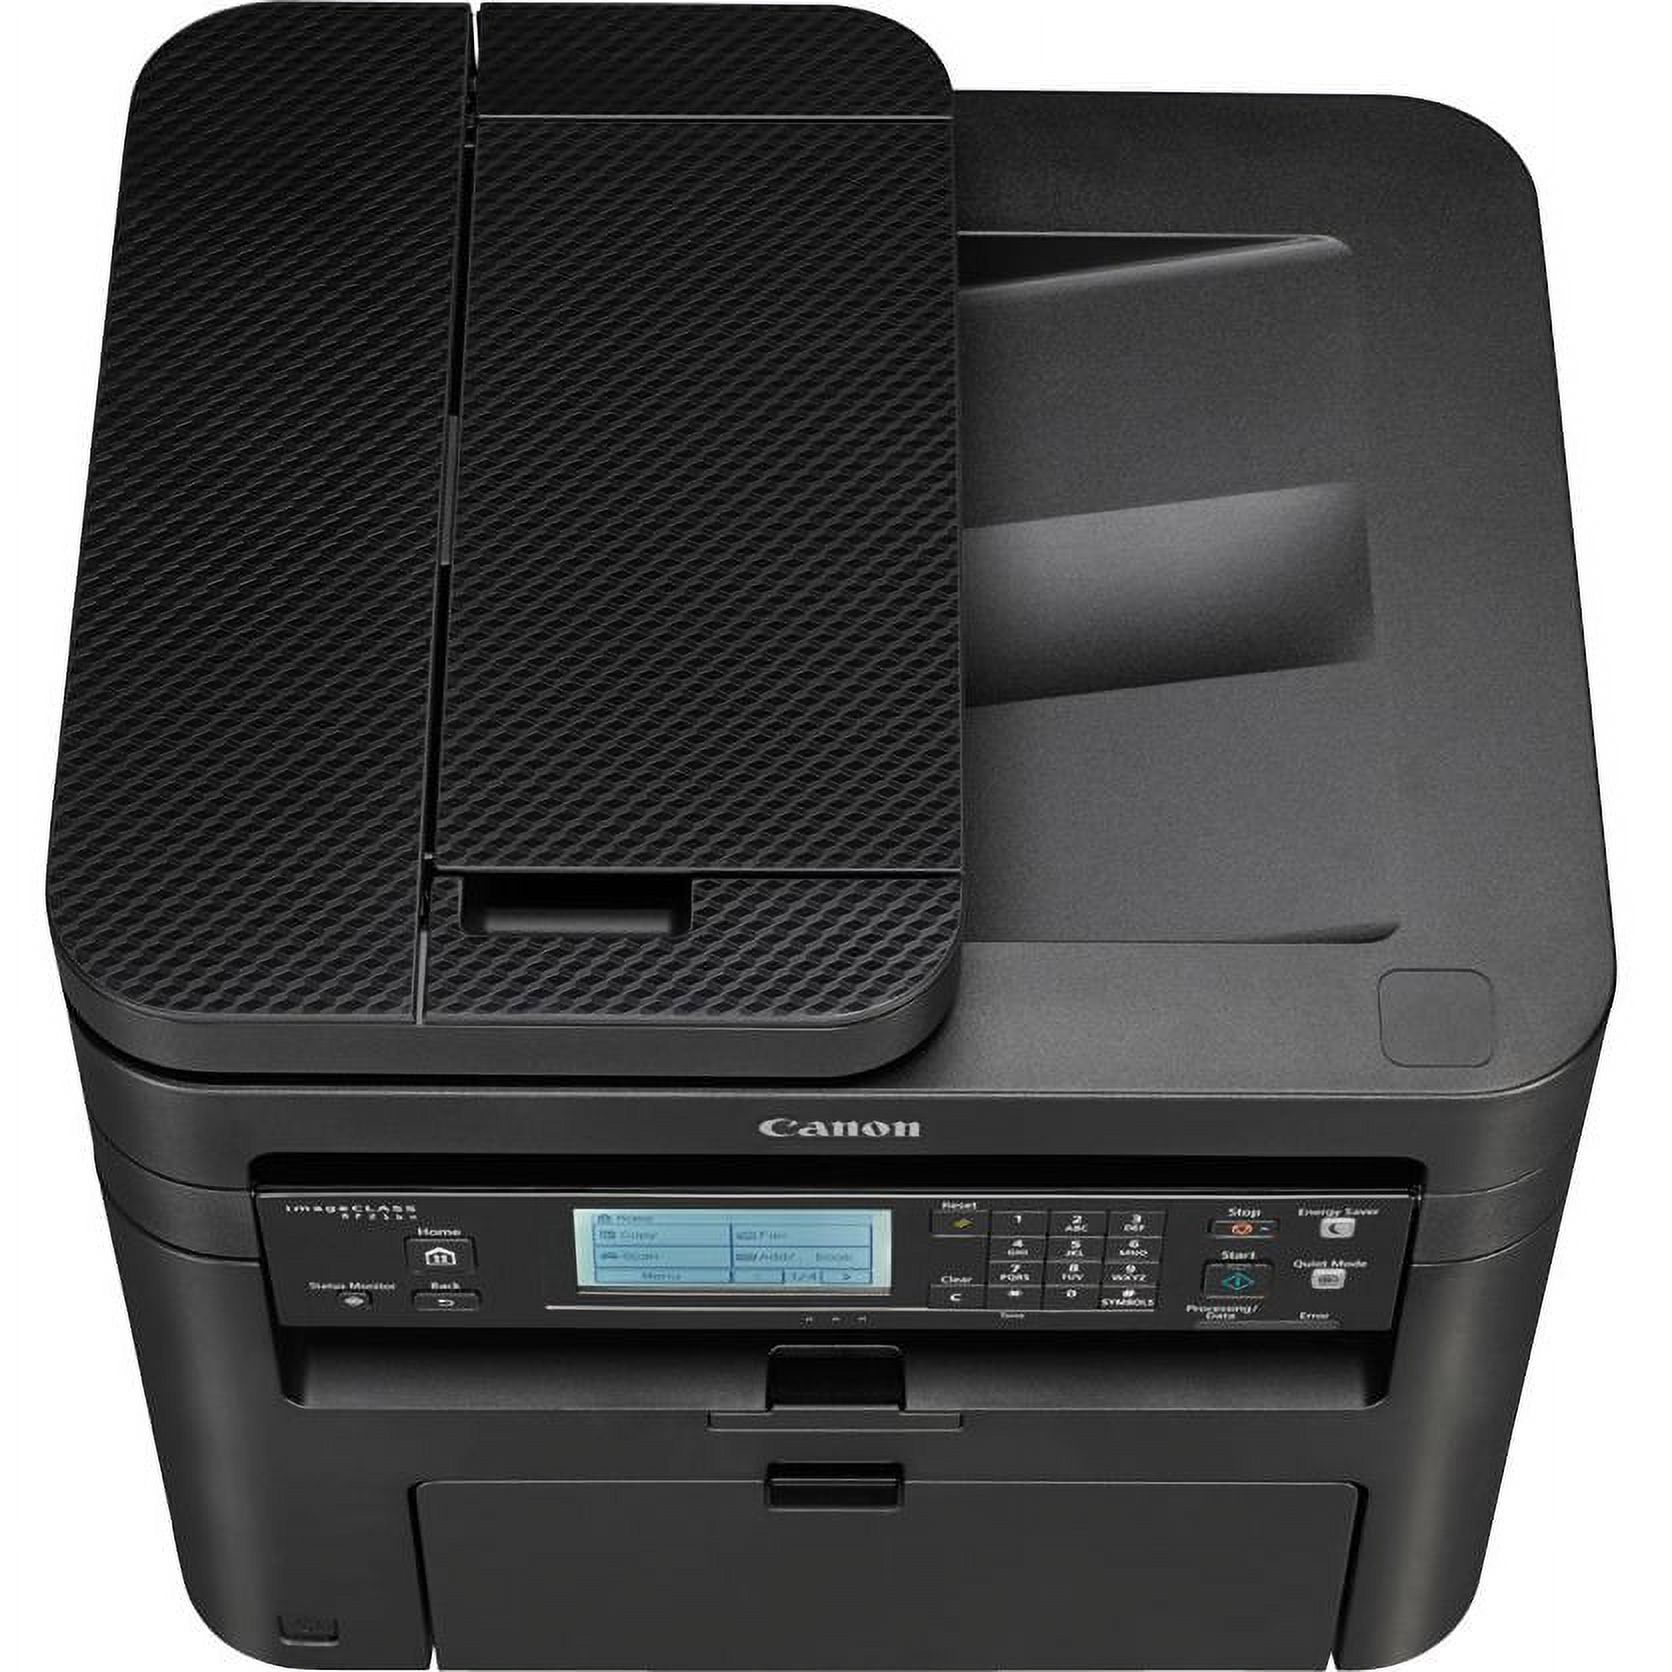 imageCLASS MF216n All-in-One Laser AirPrint Printer Copier Scanner Fax - image 4 of 4